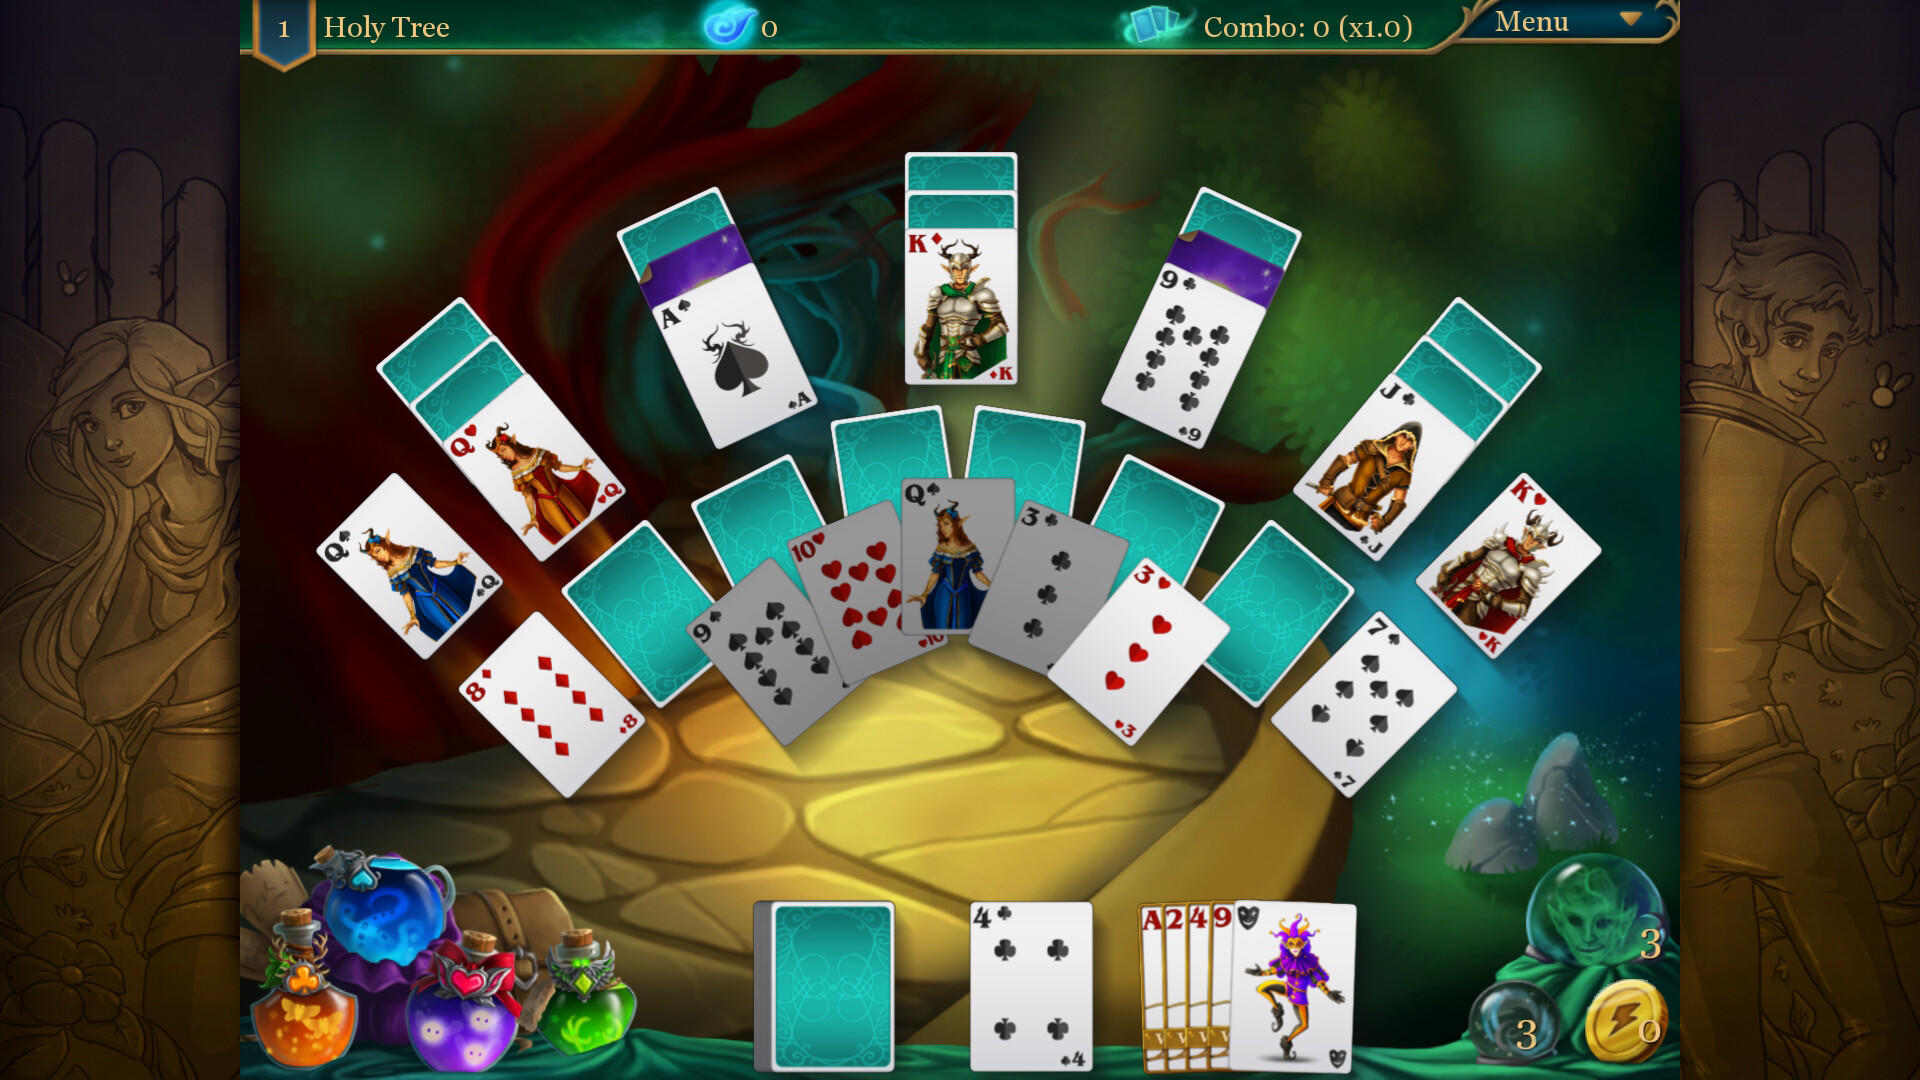 Screenshot 1 of Magic Cards Solitaire 2 - The Fountain of Life 